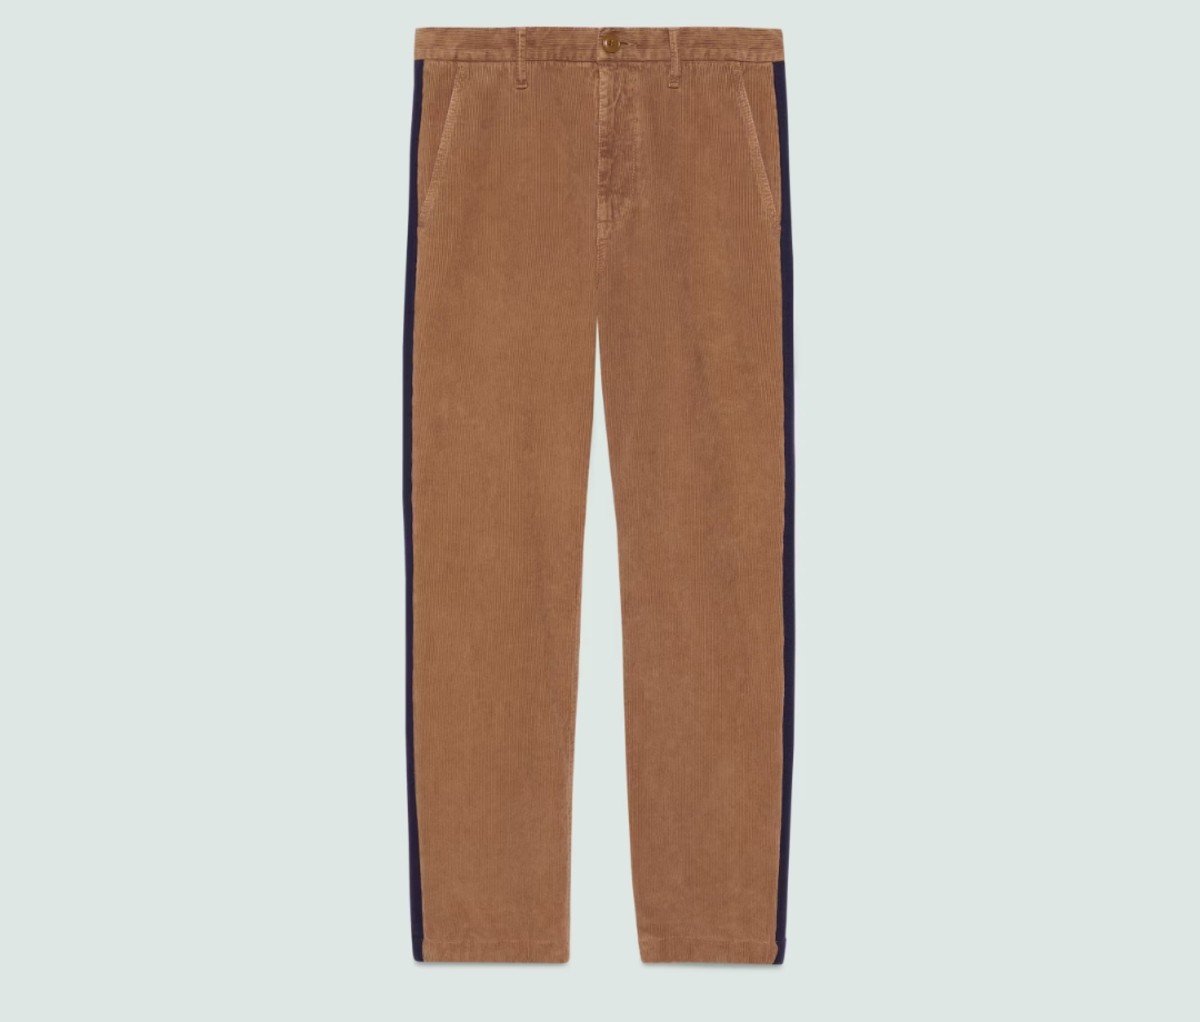 Korean Style Flared Corduroy Brown Corduroy Pants Mens With Bell Bottom  Boot Cut Leg Plus Size Brown/Red From Coralineny, $32.25 | DHgate.Com